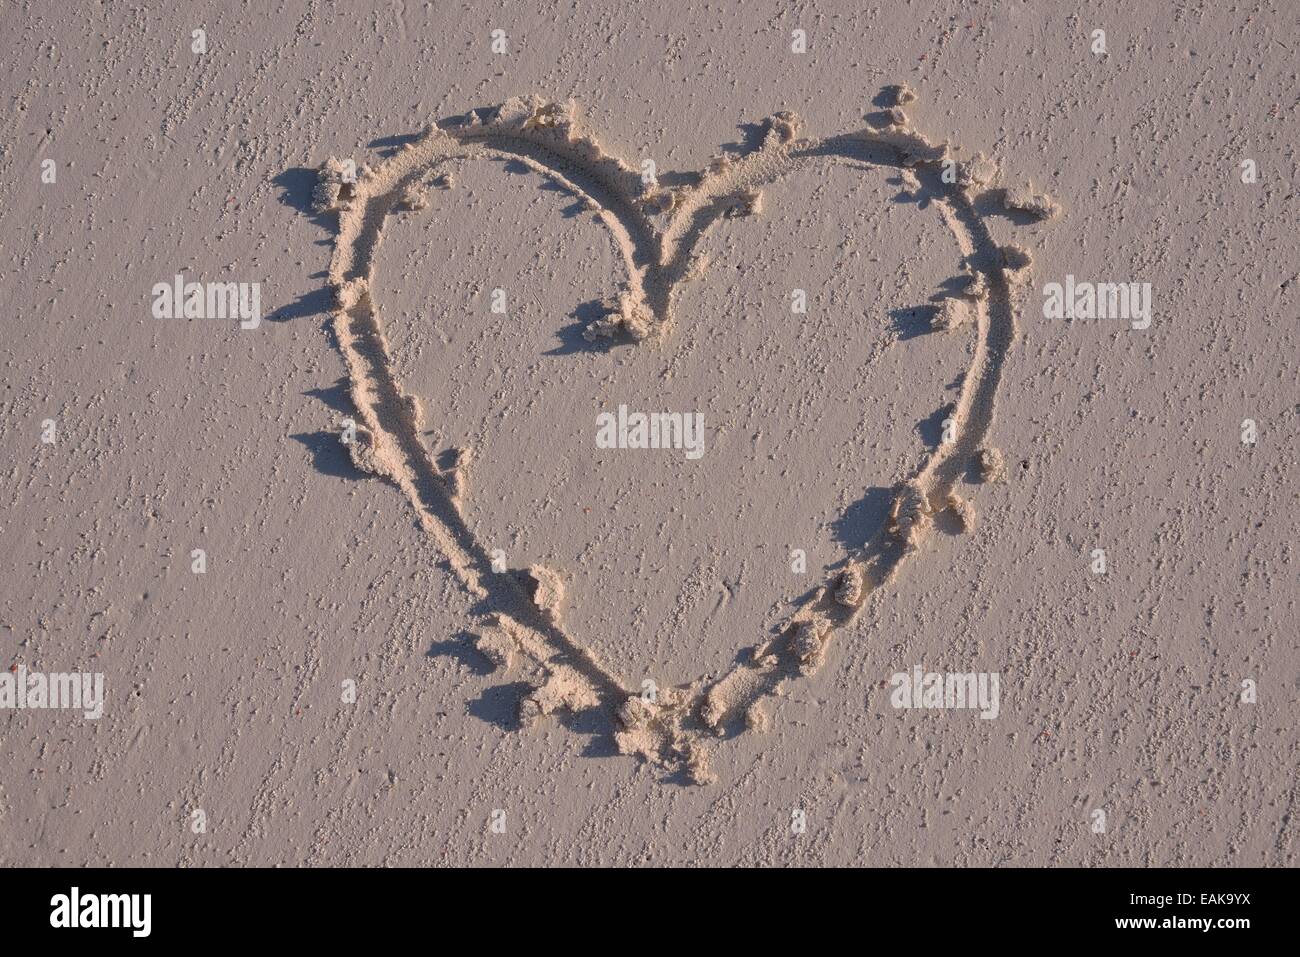 Heart drawn in the sand Stock Photo